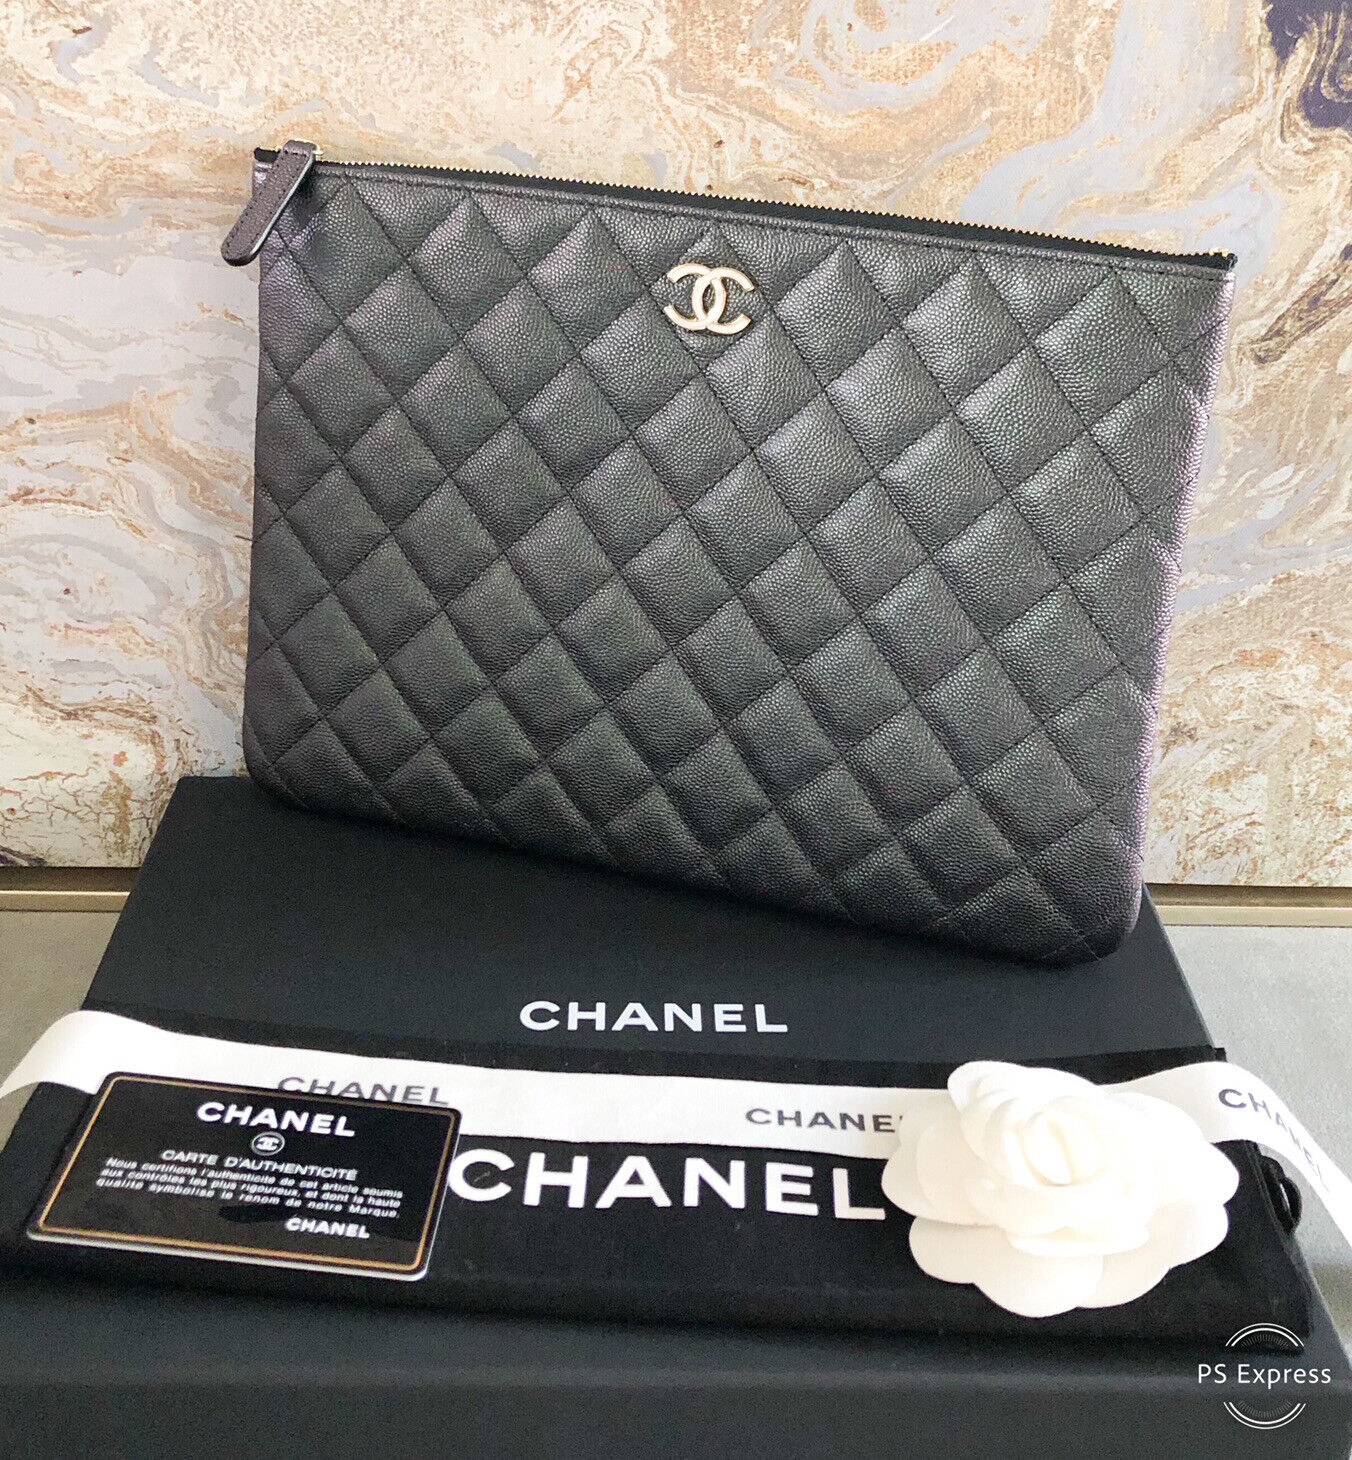 Chanel Iridescent Medium O Quilted Black Pearly CC Caviar Leather Clutch |  eBay